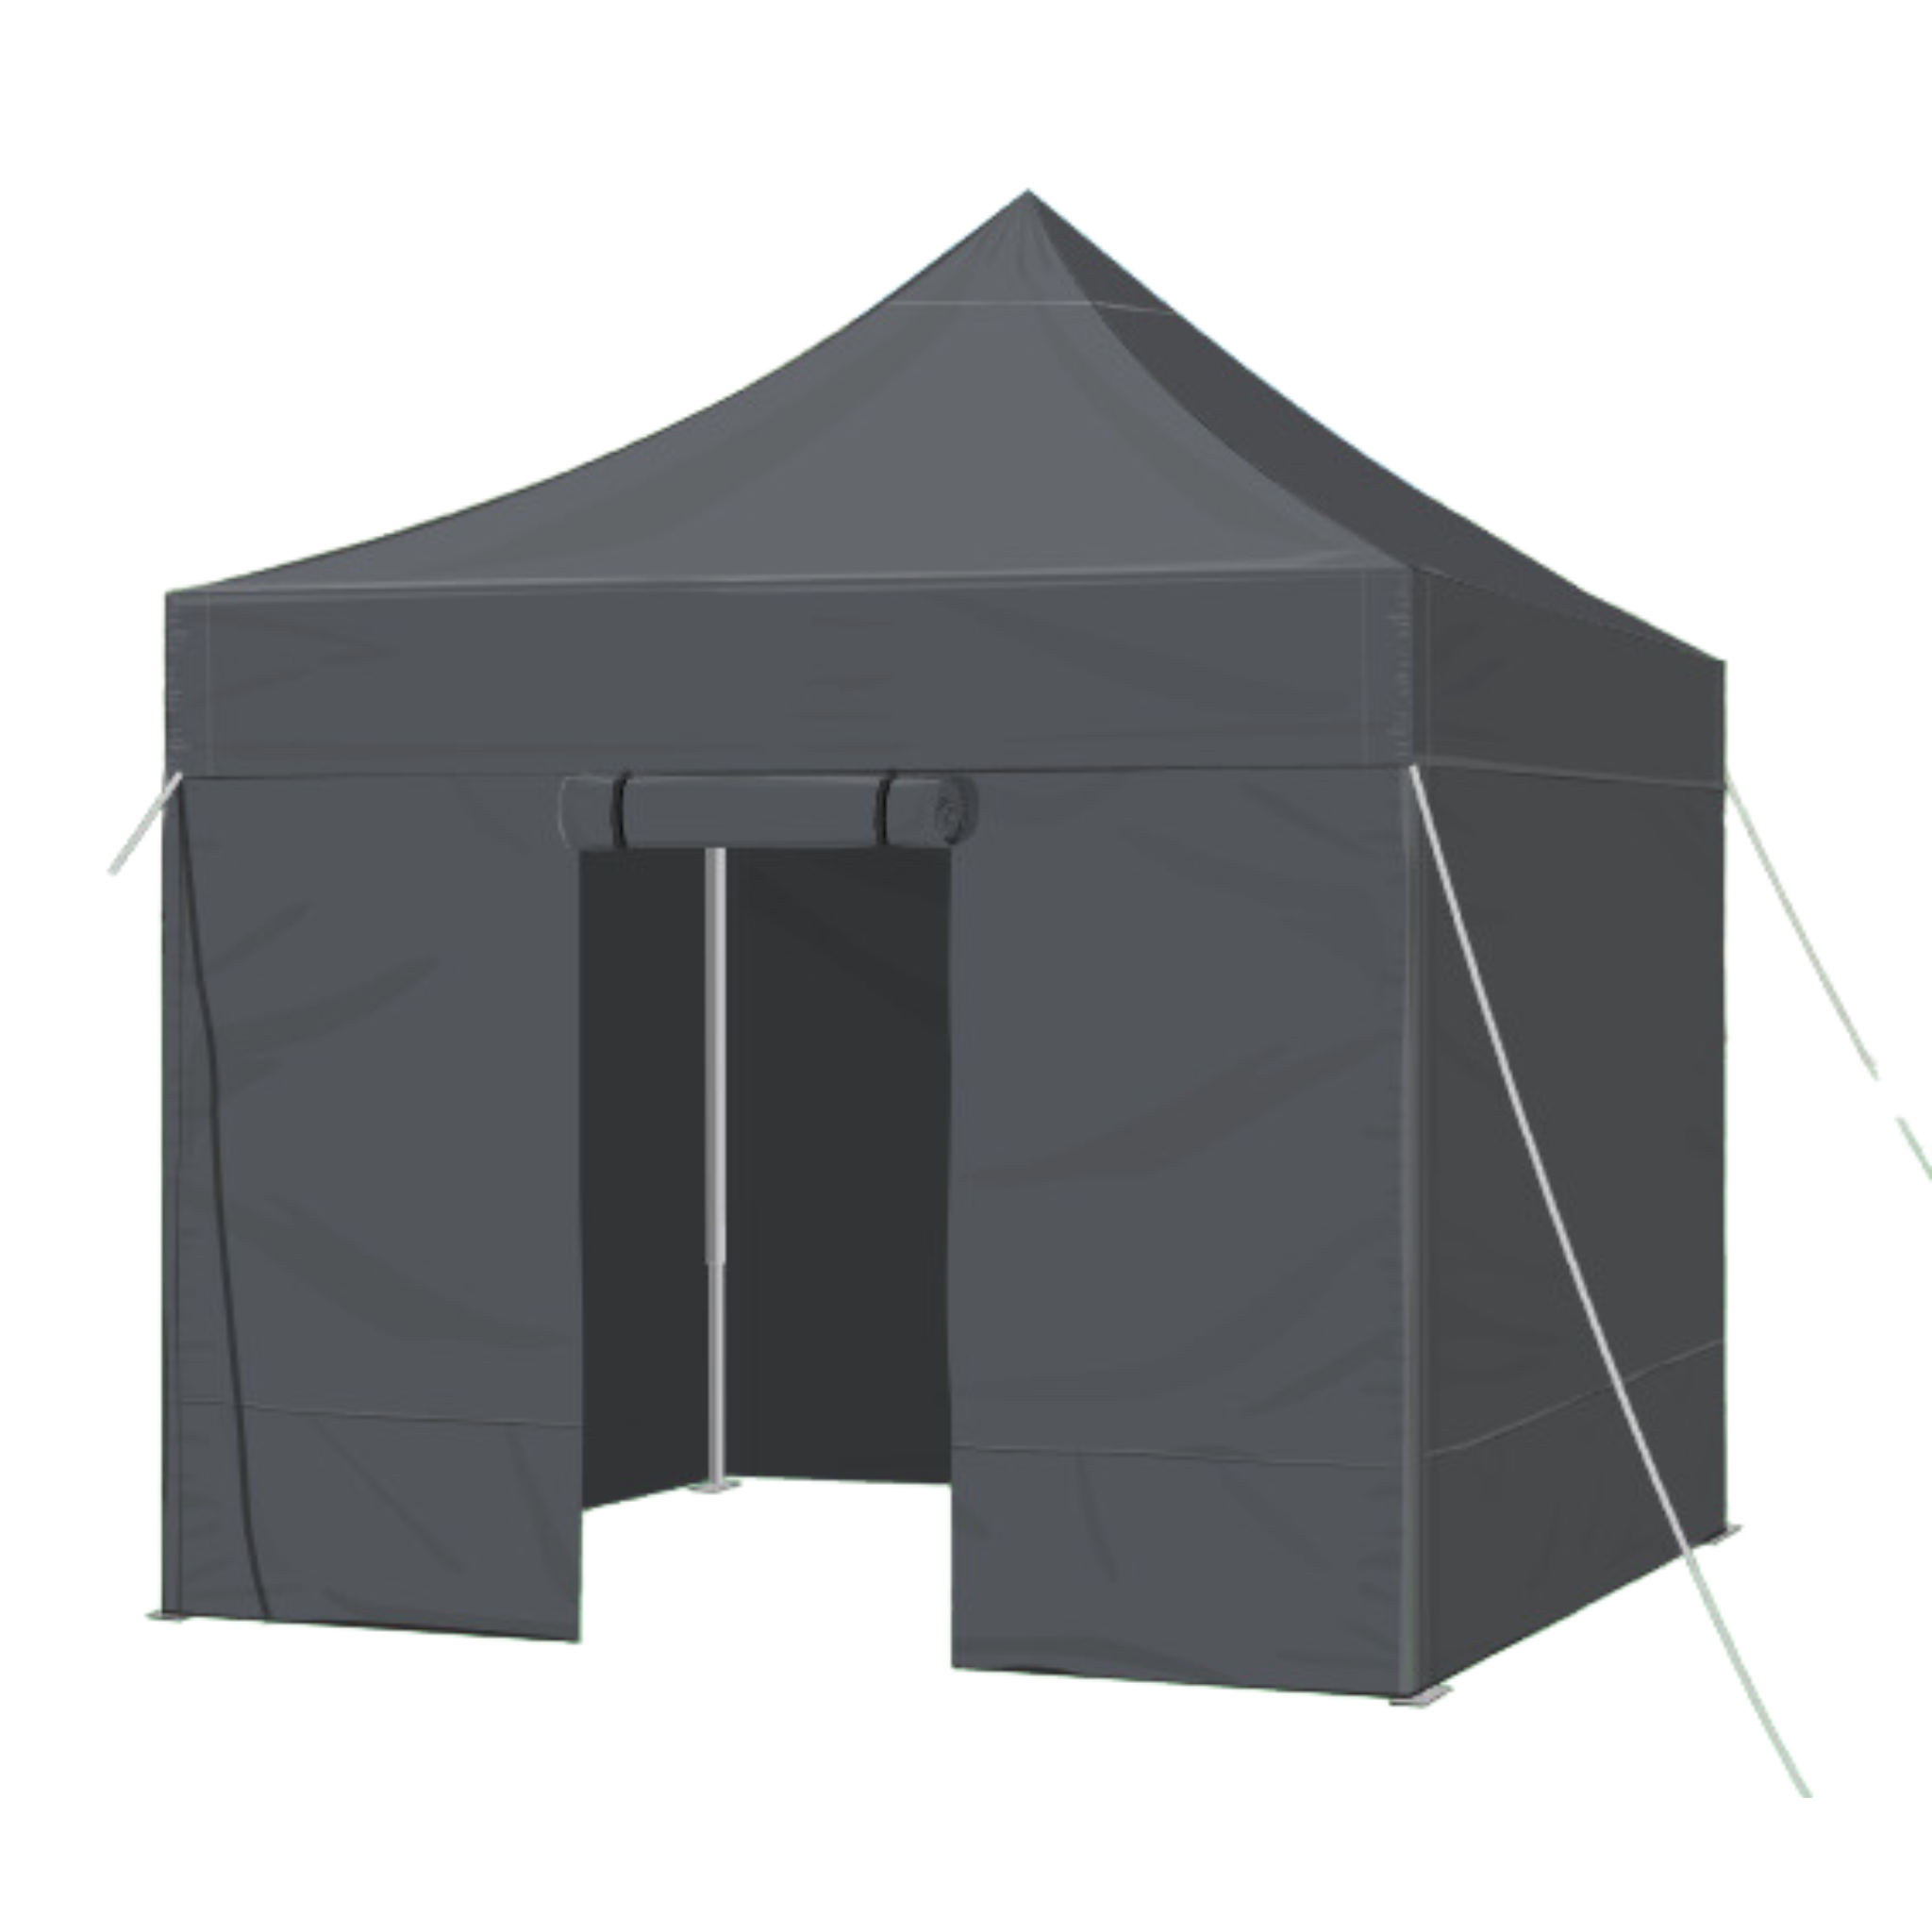 Lavabis folding tent system side walls 3x3 meters - 0